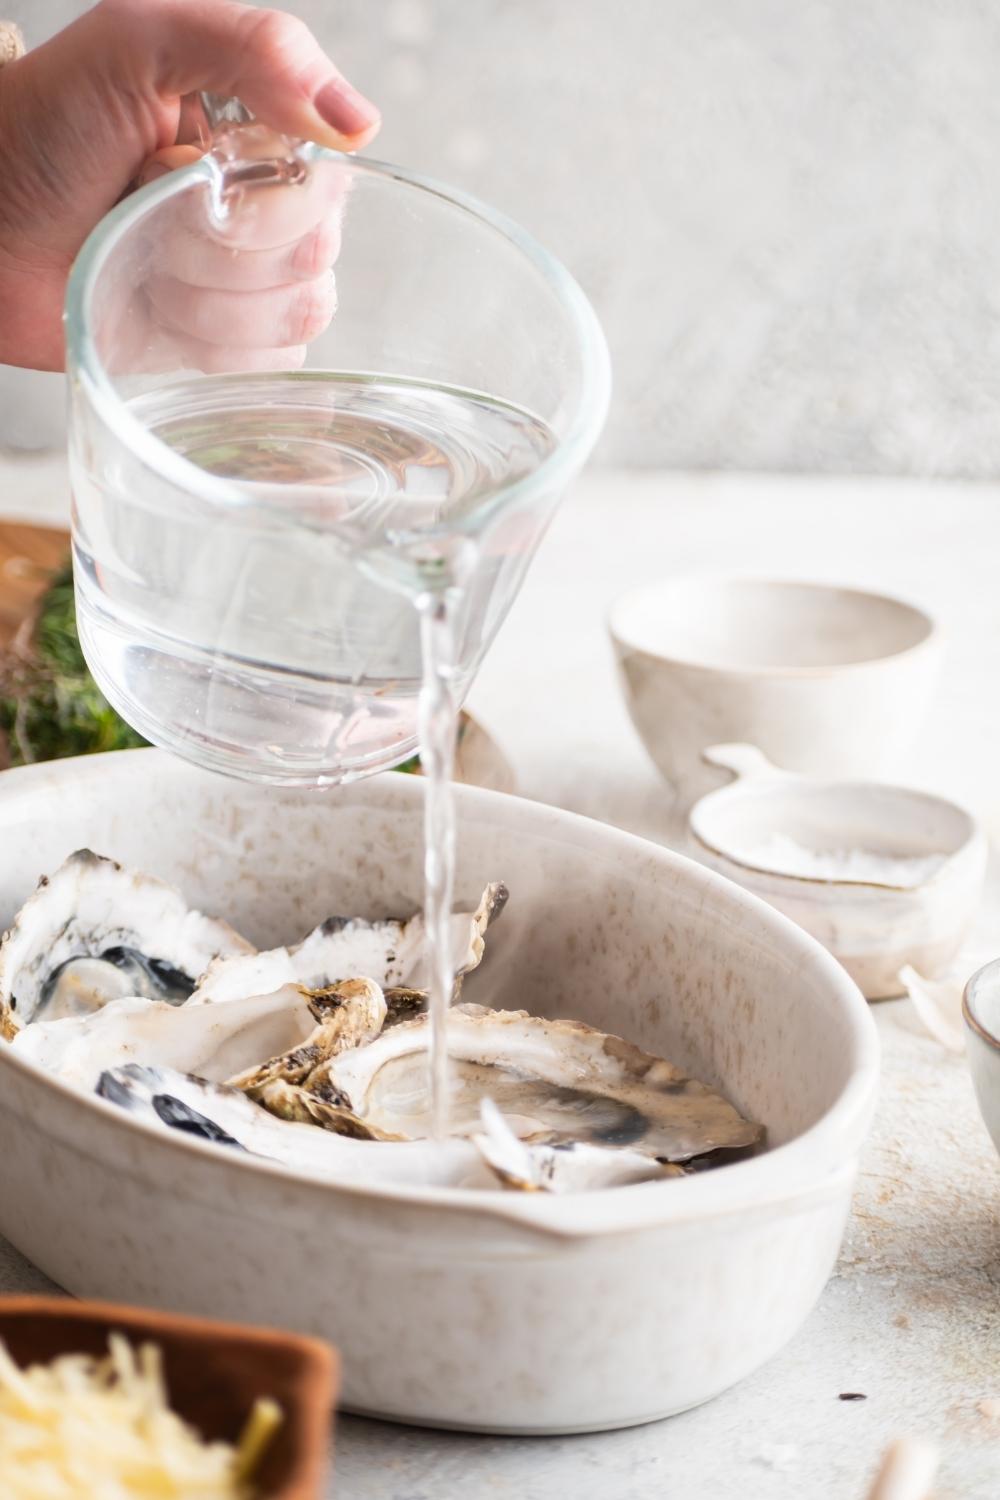 A hand pouring boiling water into an oyster shell. The oyster is in a baking dish with six other oysters.